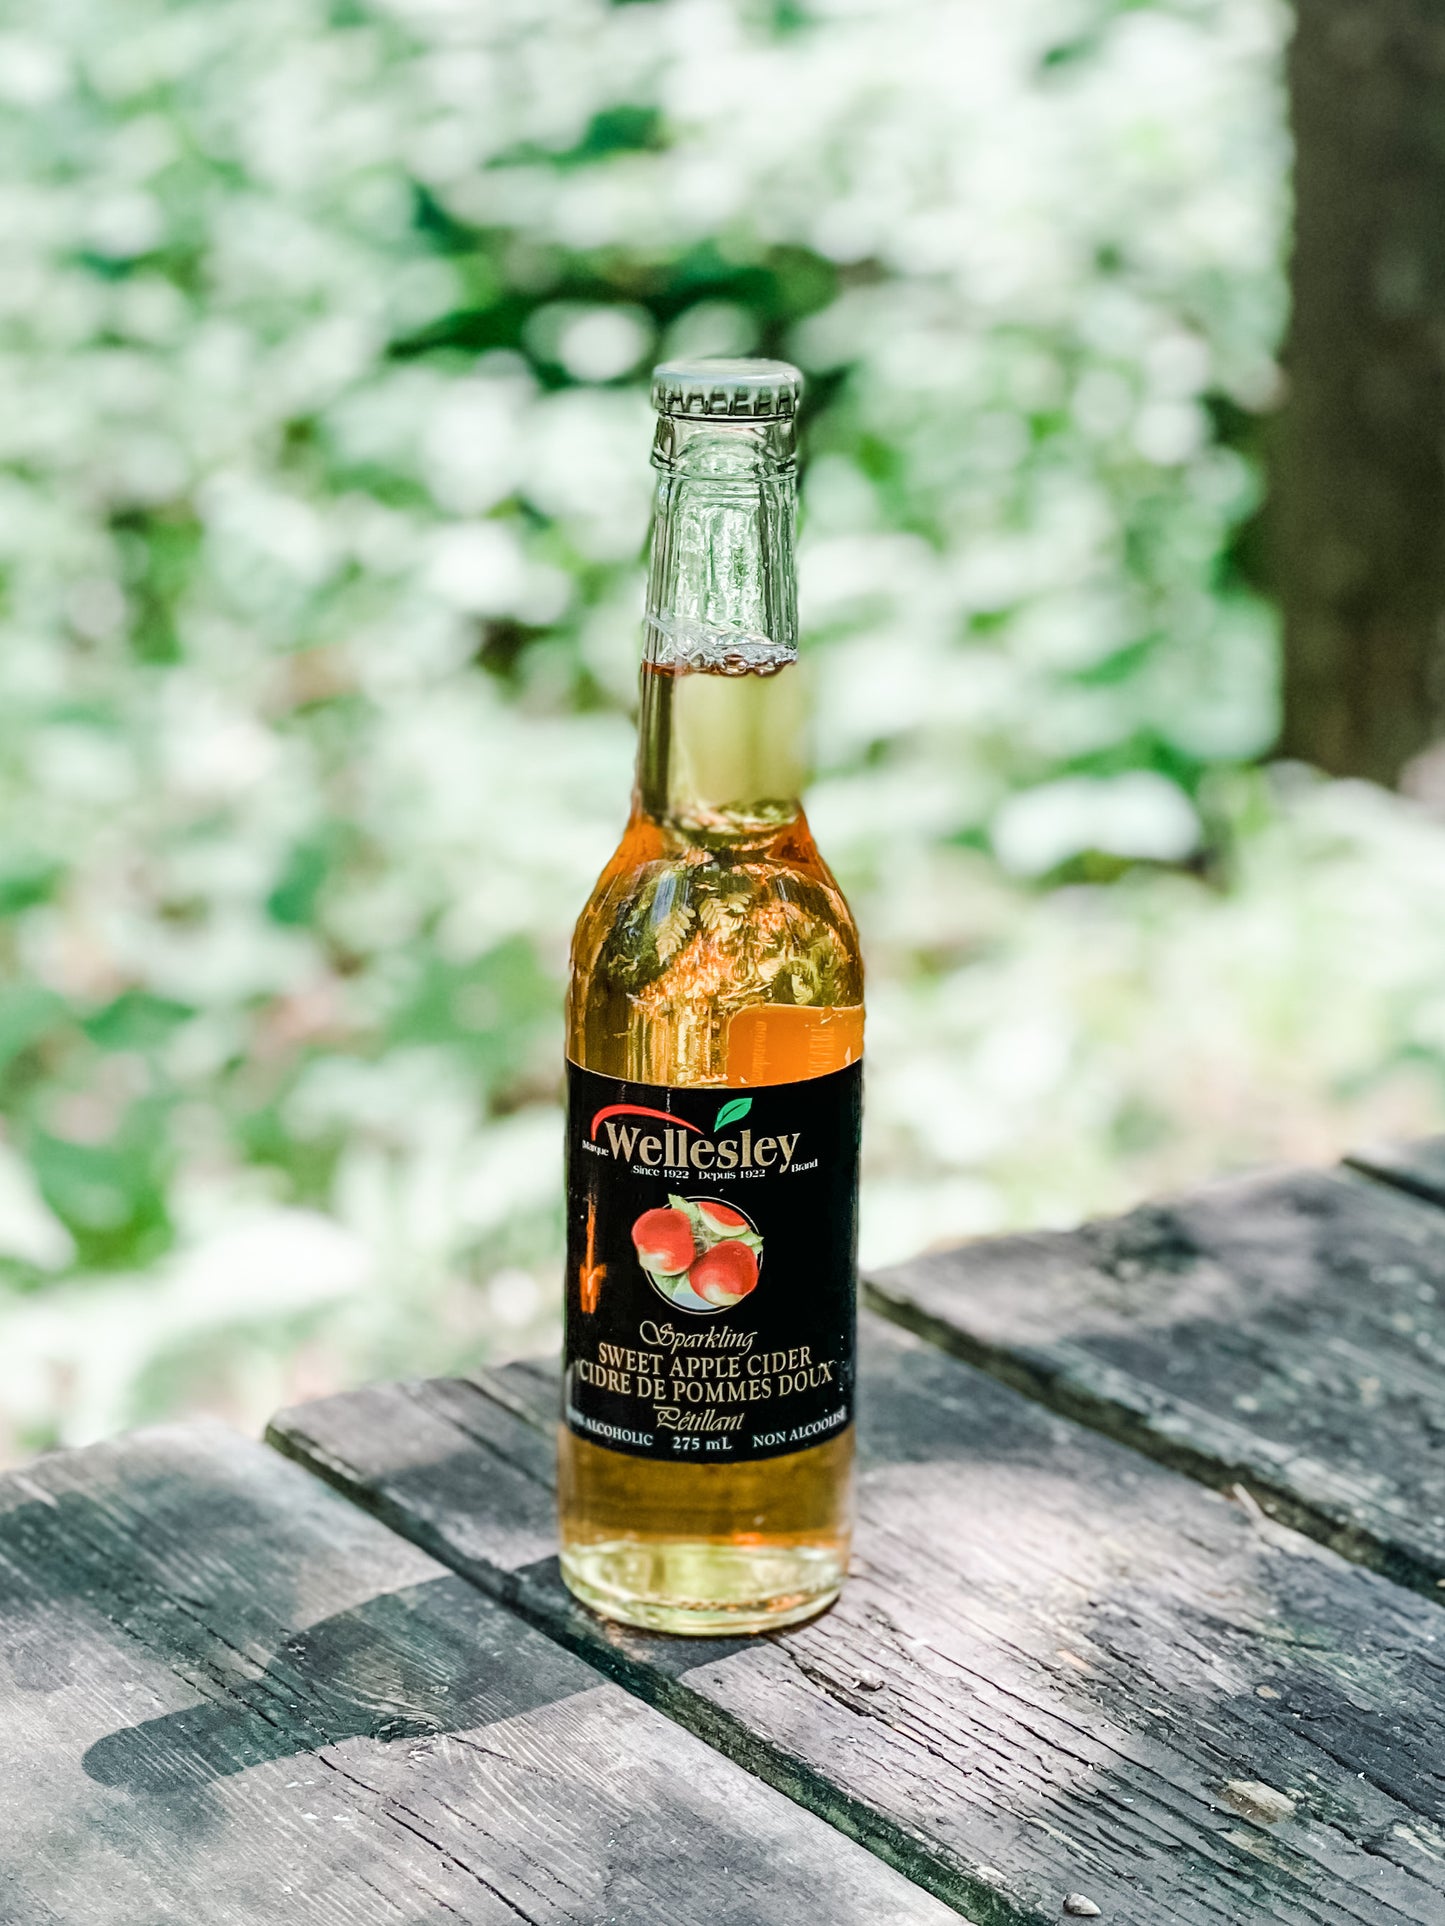 Wellesley Sparkling Non-Alcoholic Sweet Apple Cider 275ml - No Added Sugar & Preservative Free